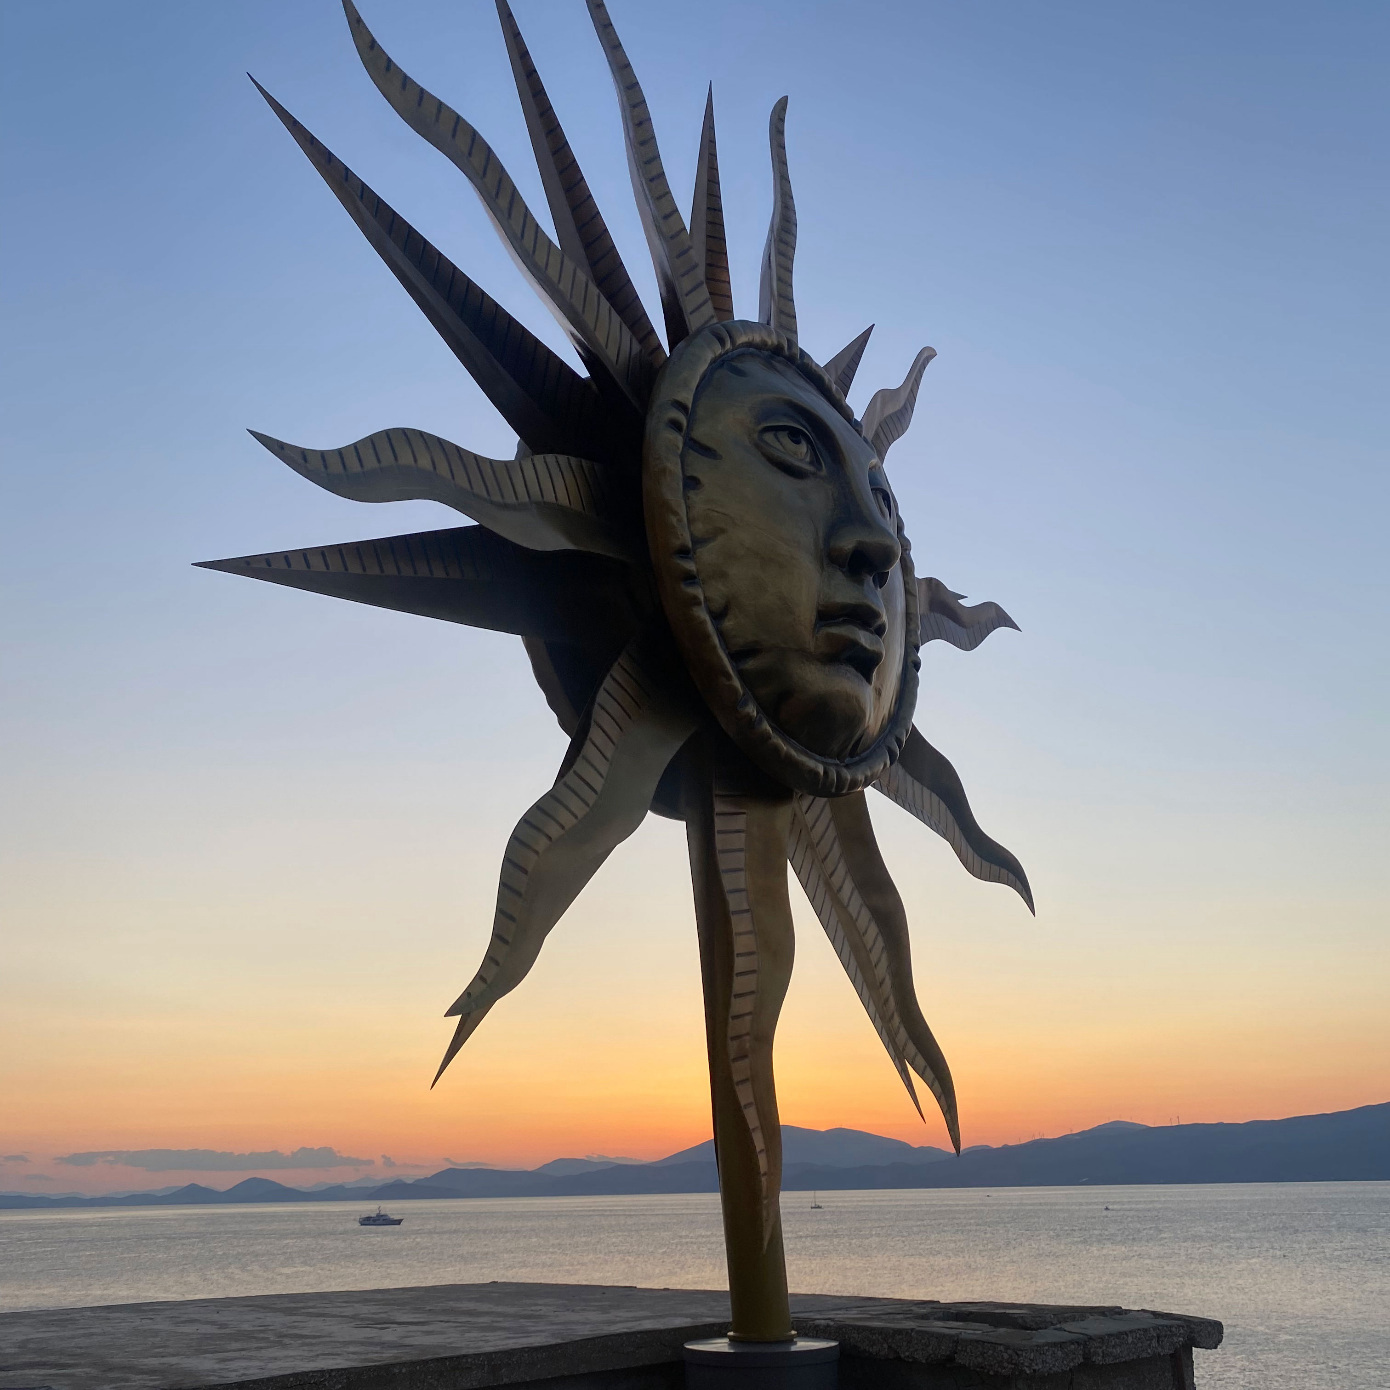 On Greece's After-Party Island of Hydra, Jeff Koons Unveils a Monument to the Sun and Friendship